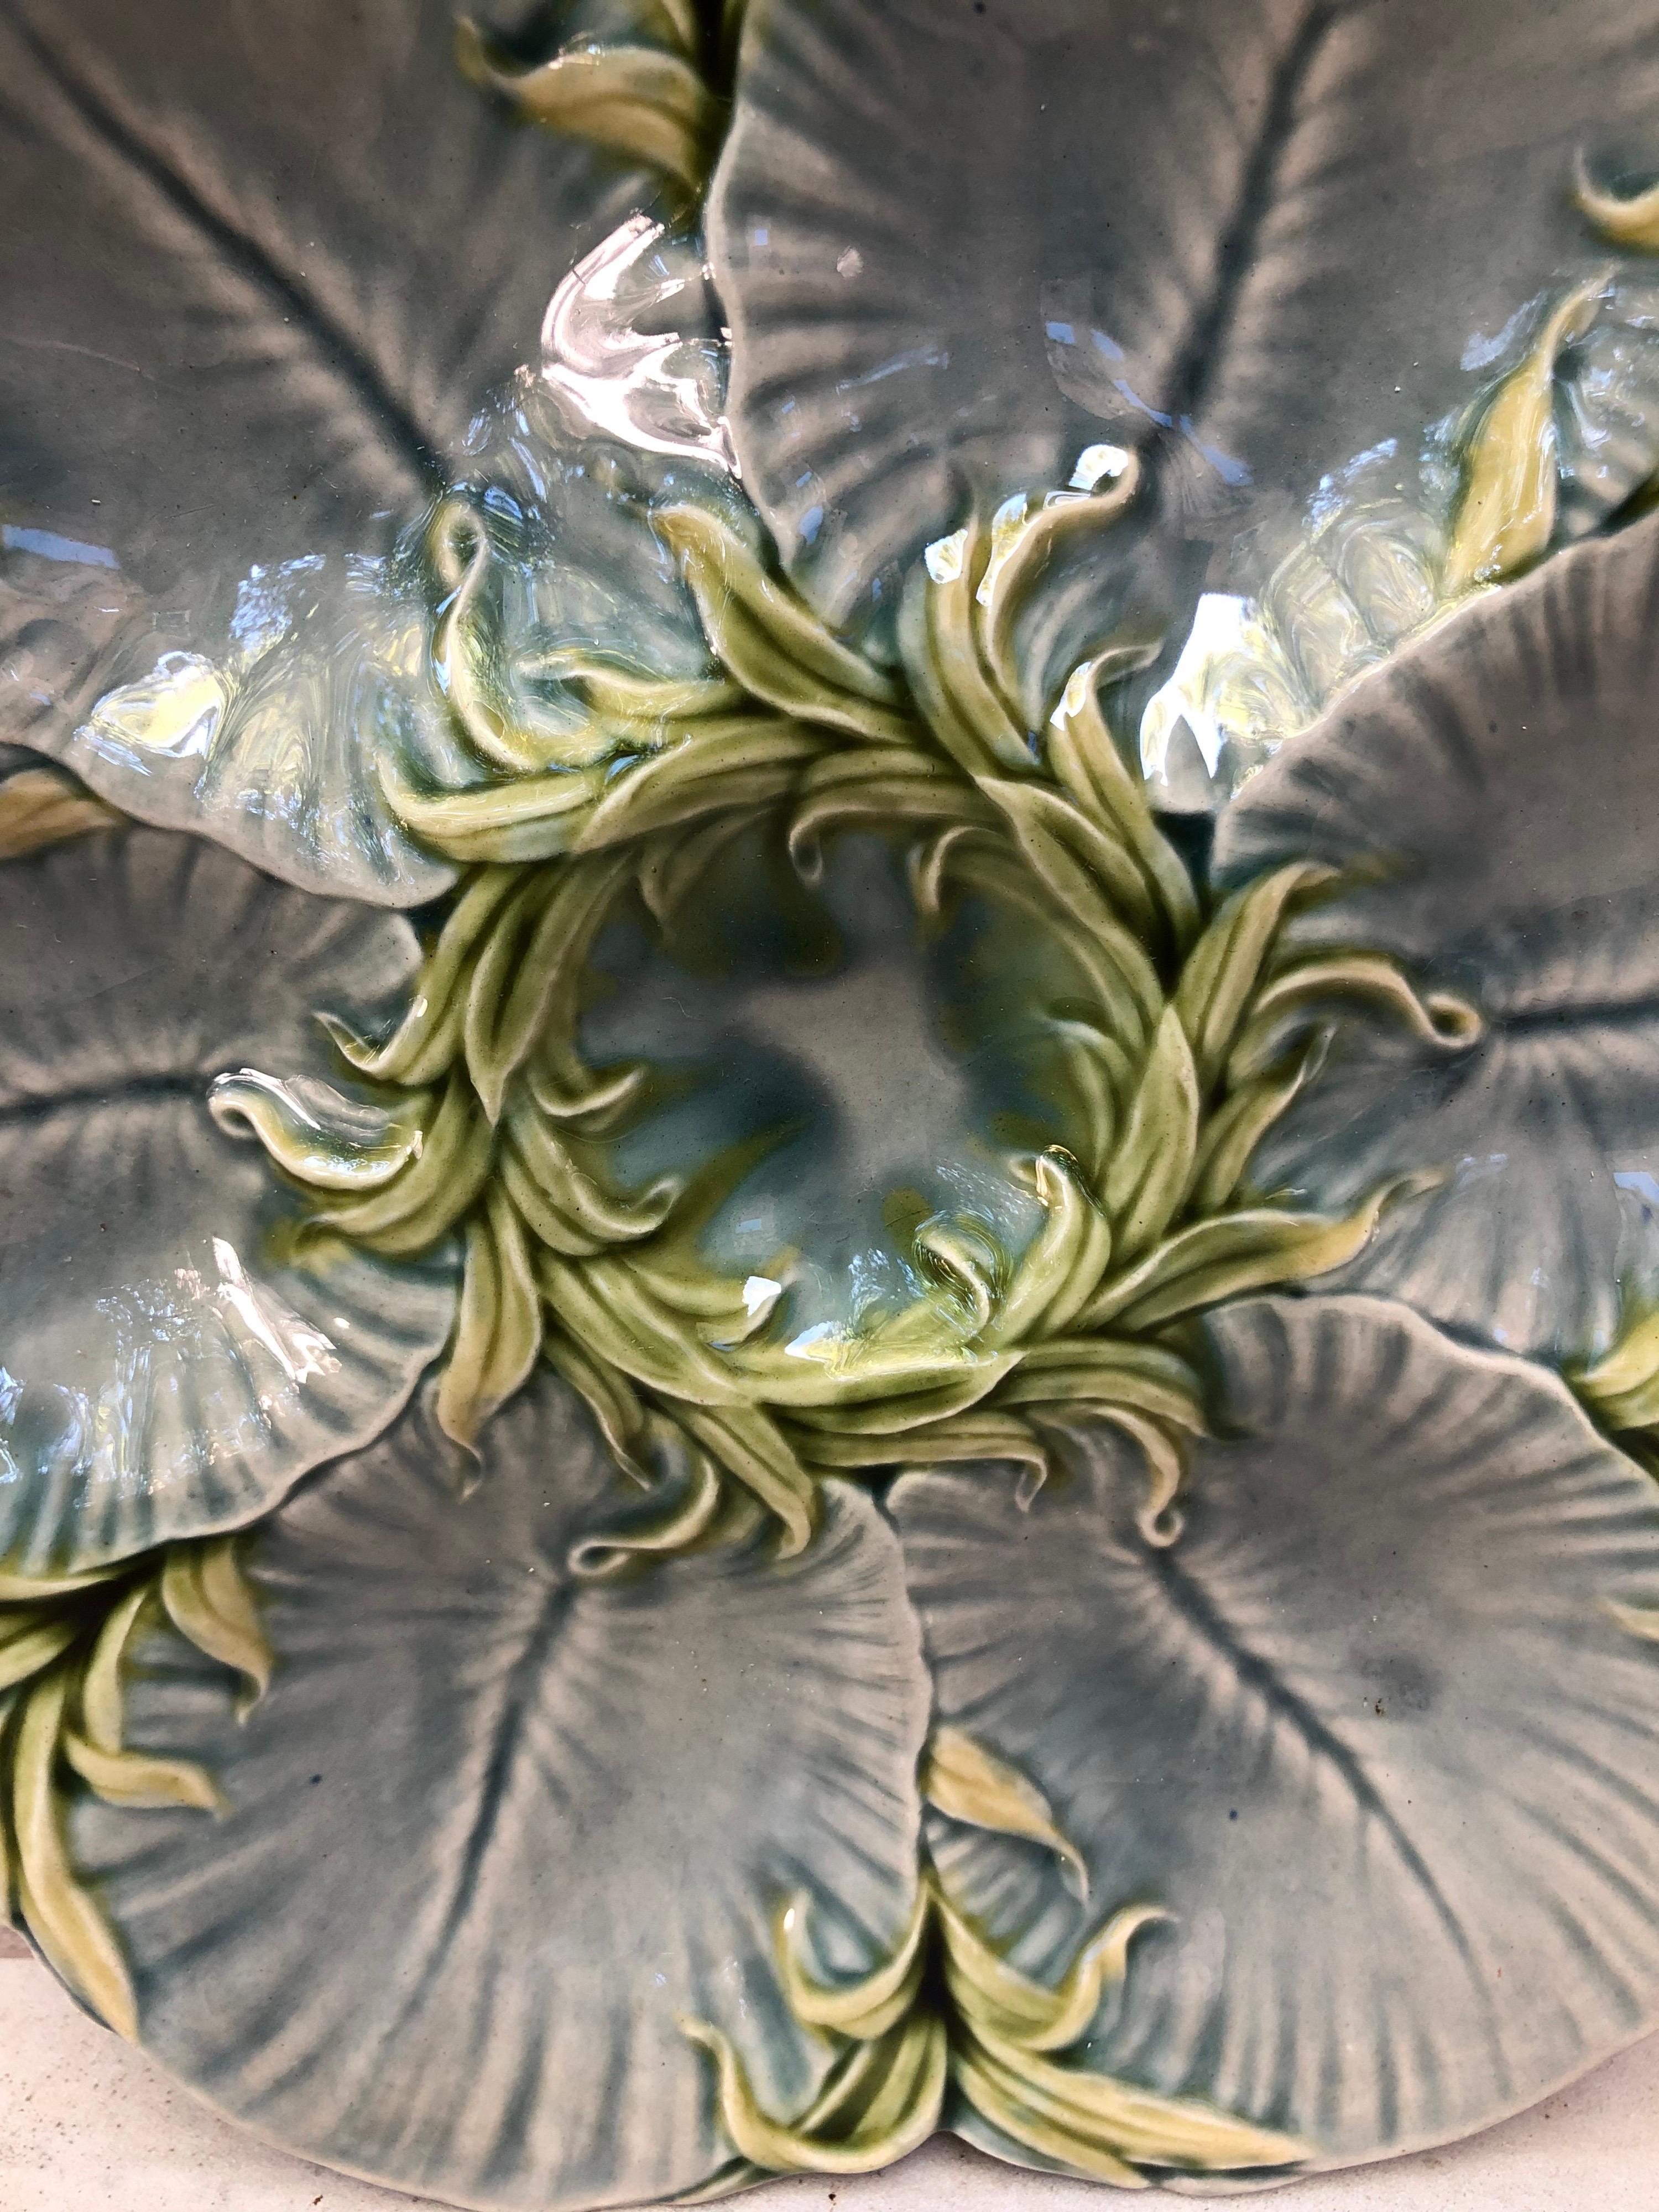 19th century Majolica gray oyster plate with green seaweeds Luneville.
Reference: Page 43 